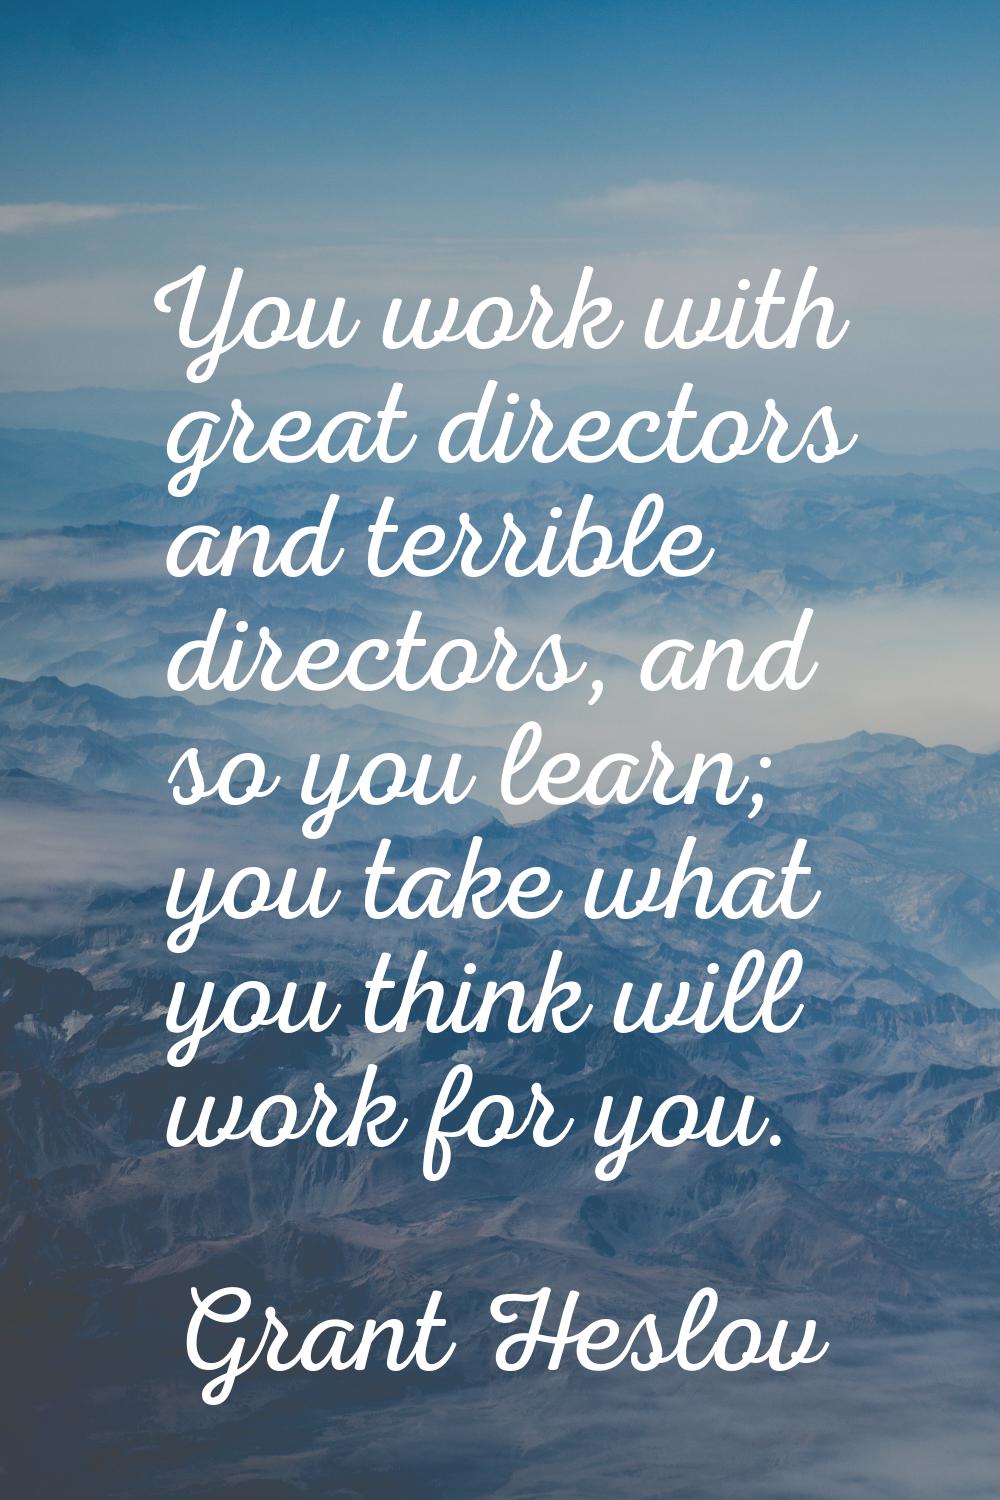 You work with great directors and terrible directors, and so you learn; you take what you think wil